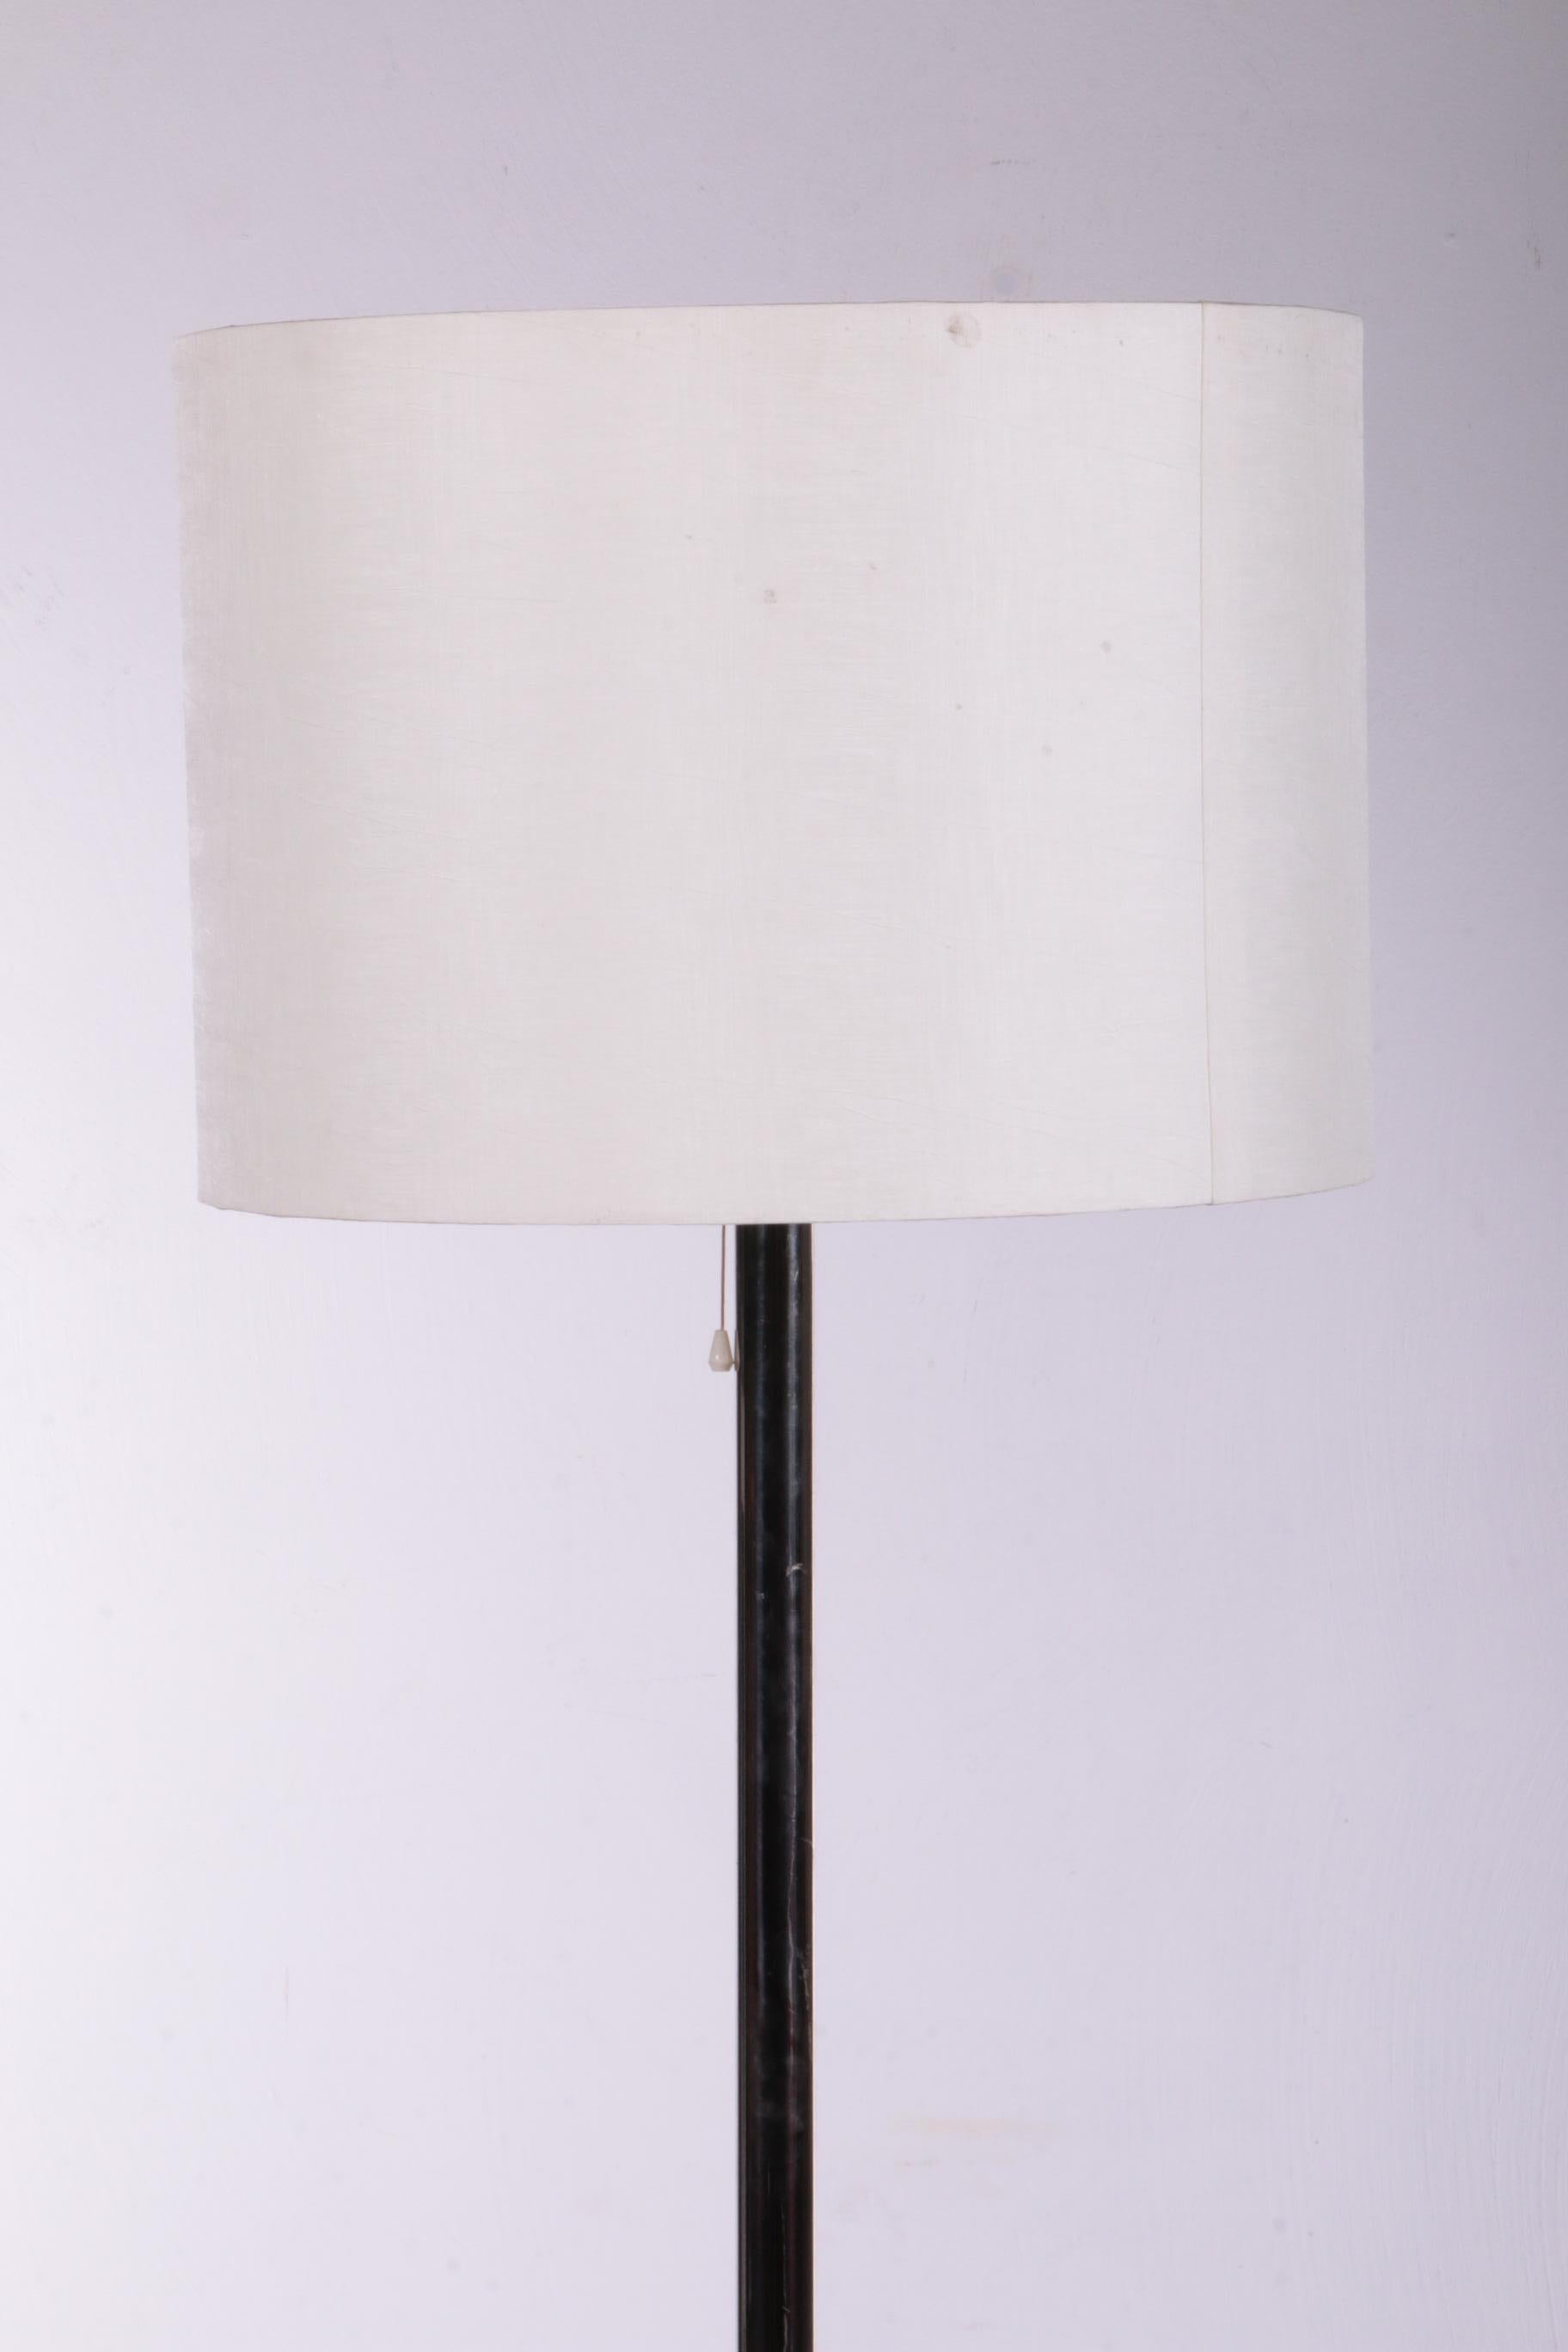 Large Floor Lamp with Chrome Stem and 3 Light Fittings in the Shade by Temde For Sale 5